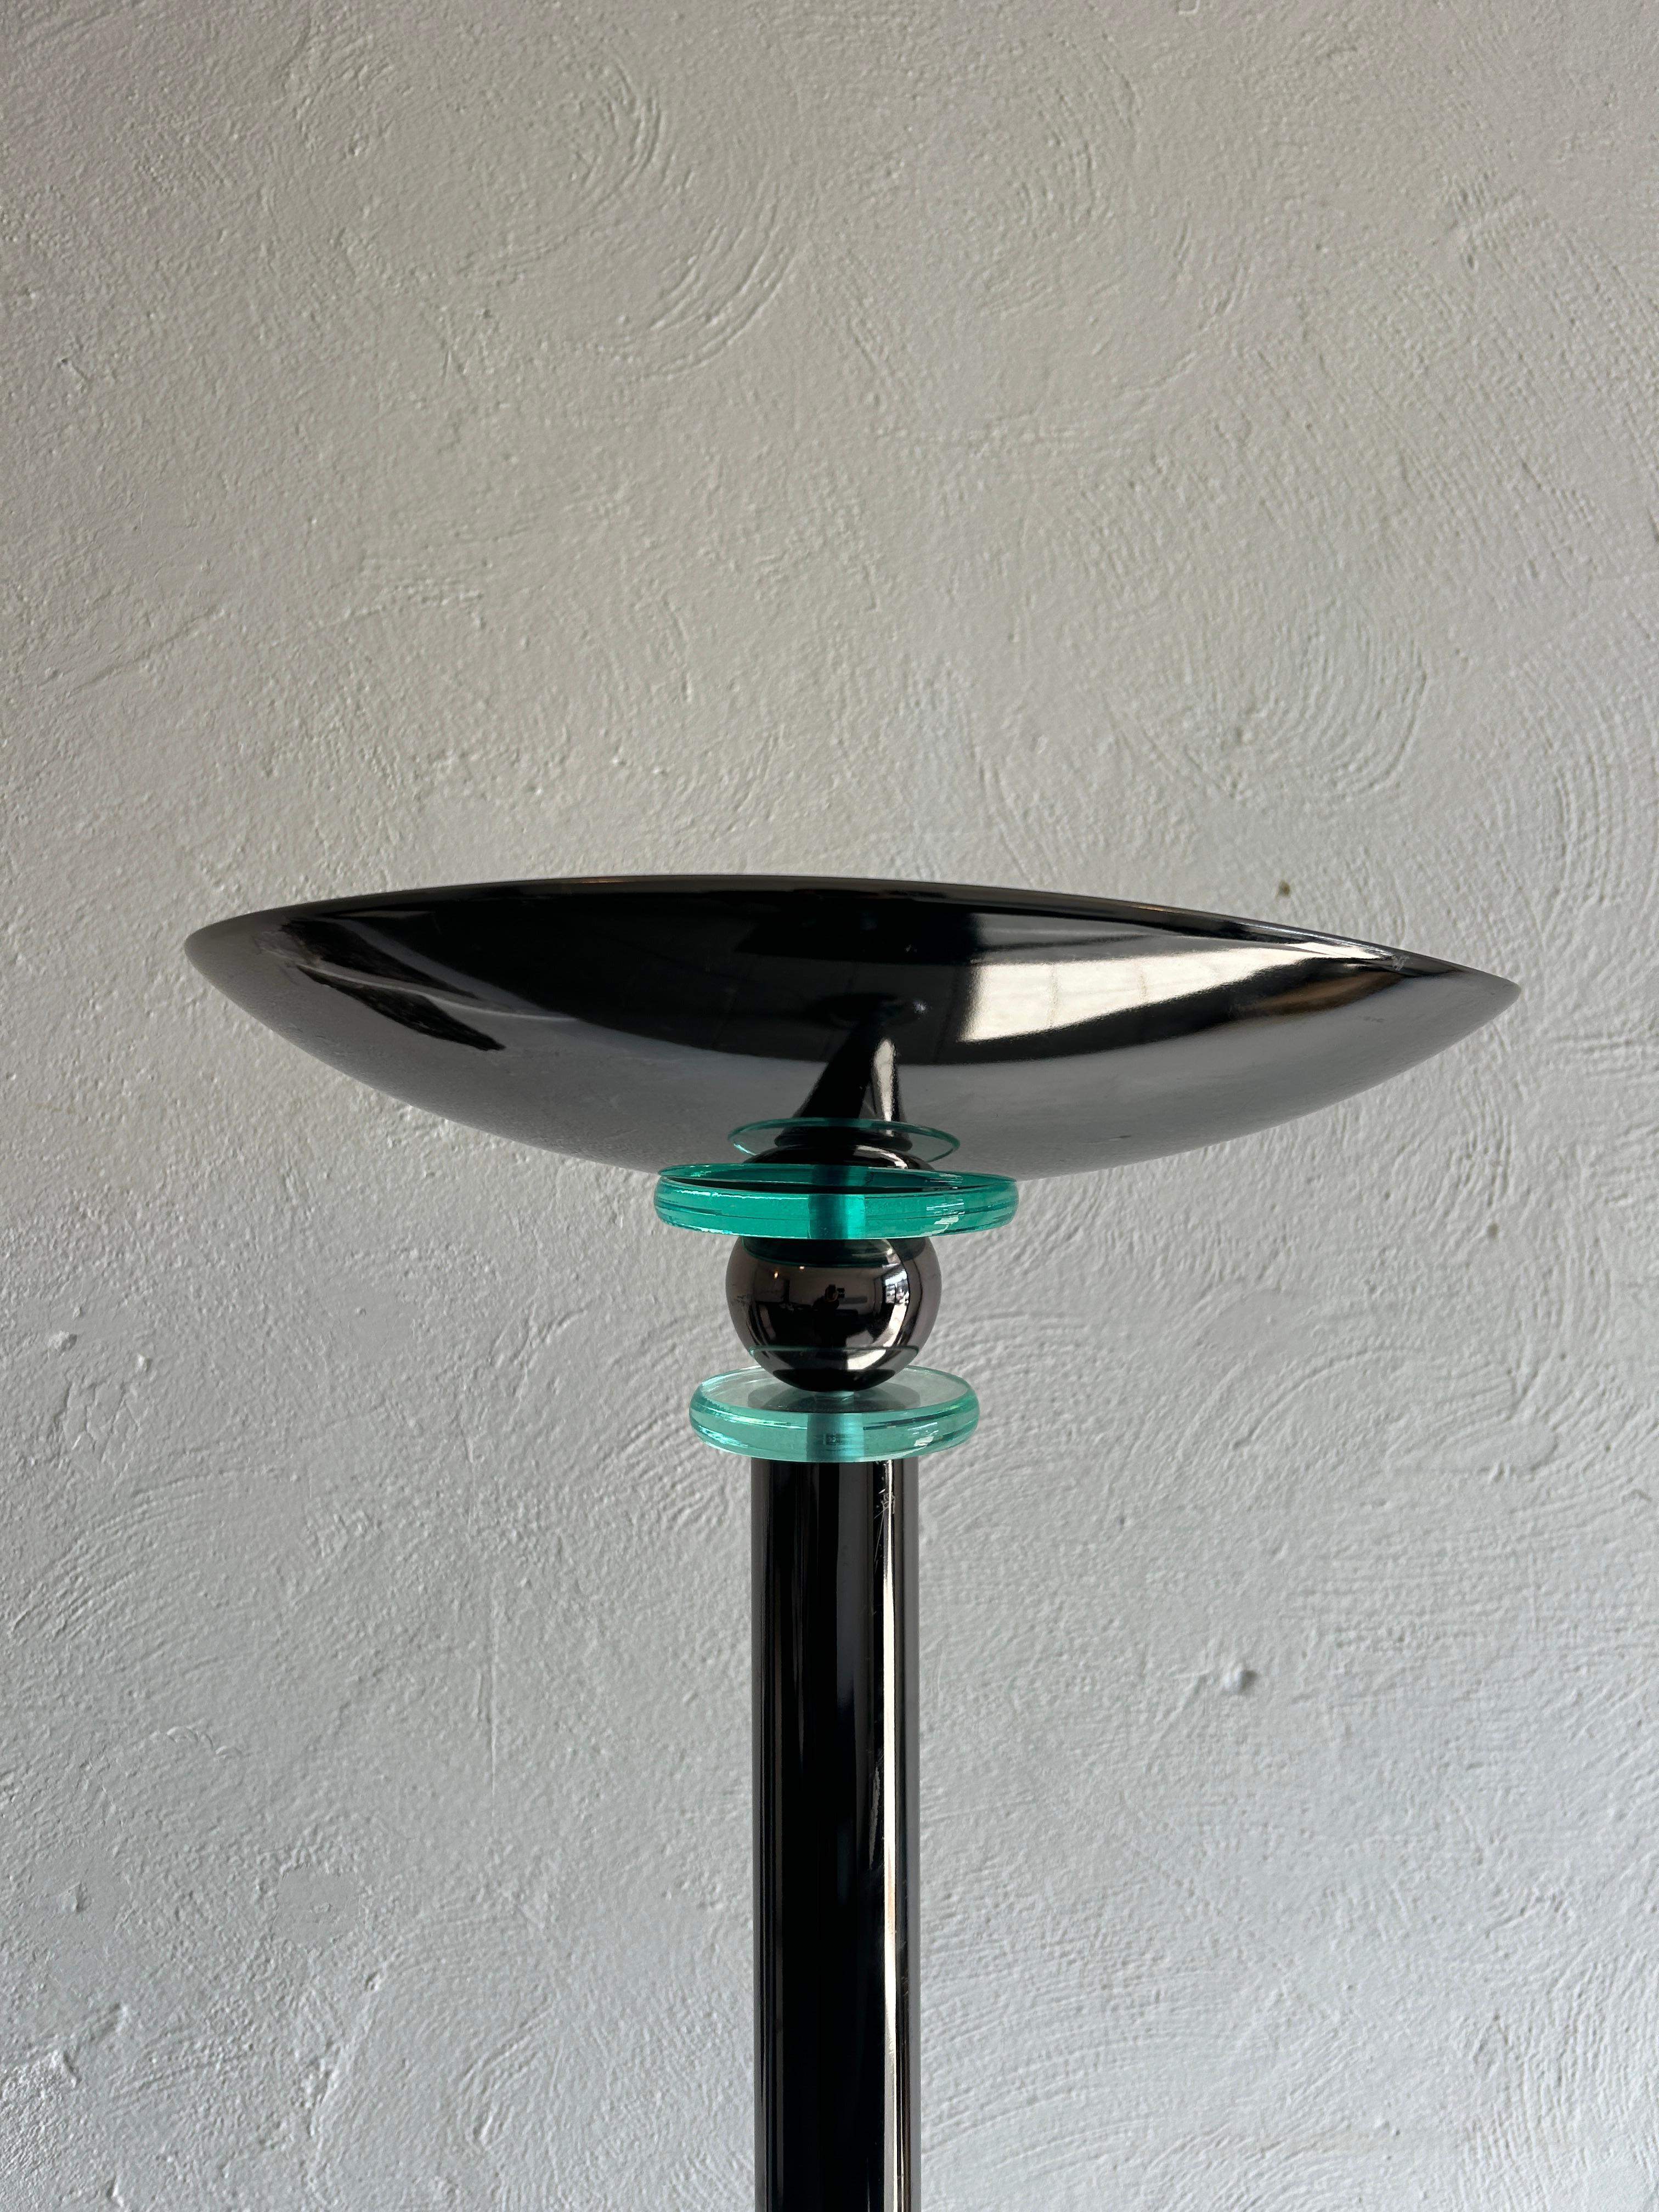 Post modern torchiere floor lamp gray chrome blue glass. Lamp works 100%. Very unique post modern design. Located in Brooklyn NYC.


Good condition 
Has built in dimmer
120v plug USA 
Halogen bulb 